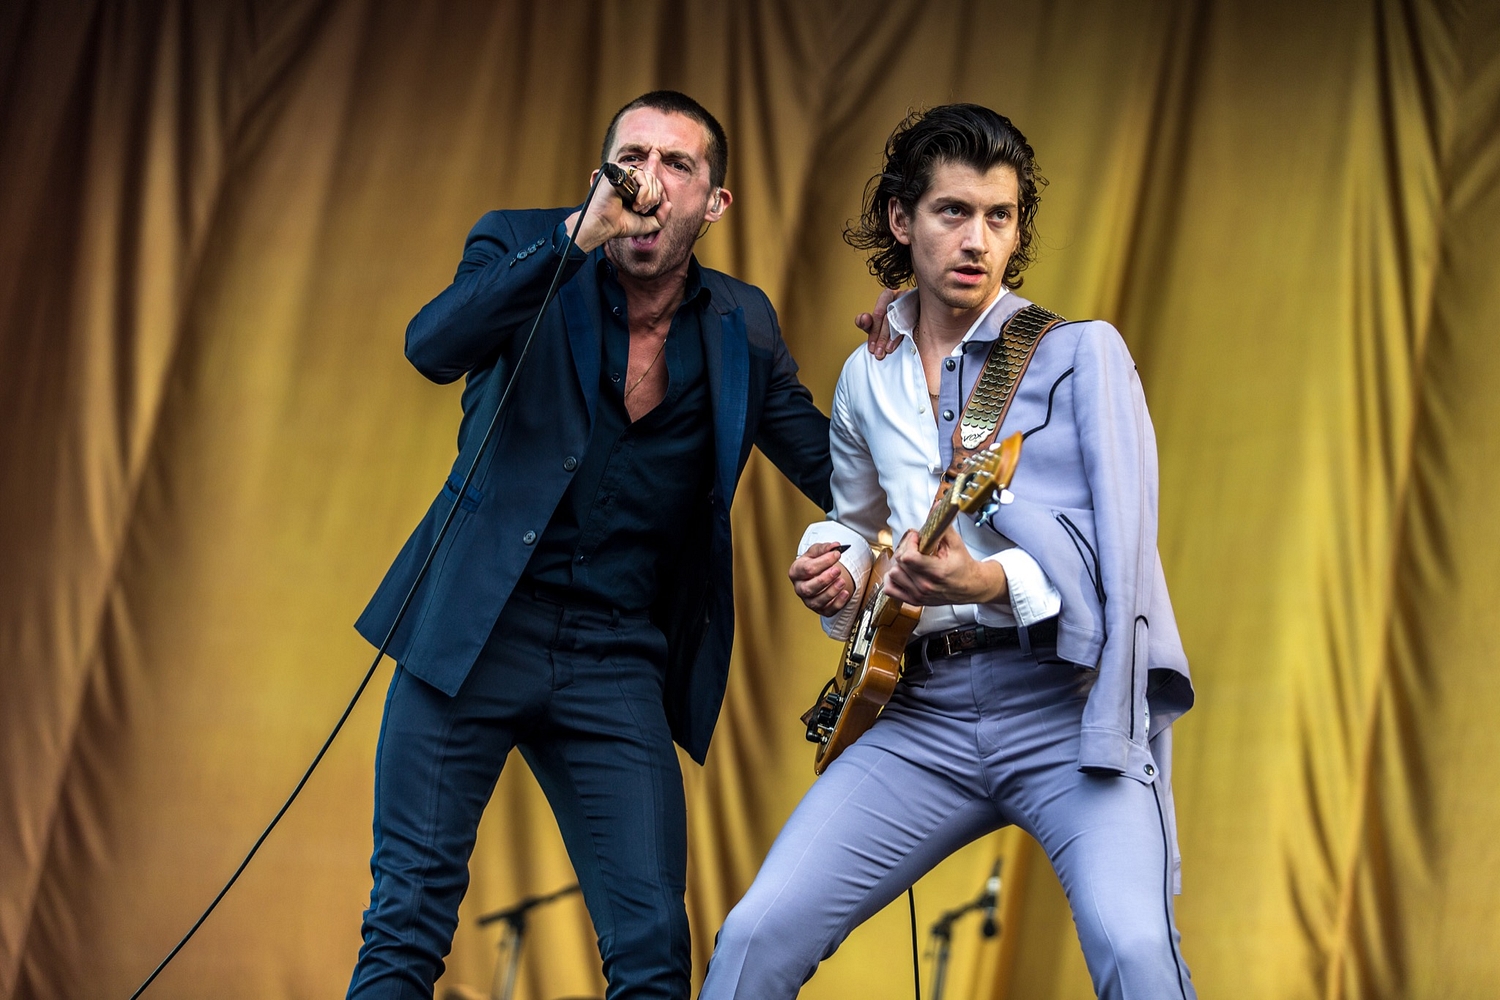 Watch Alex Turner joining Miles Kane on stage in Paris